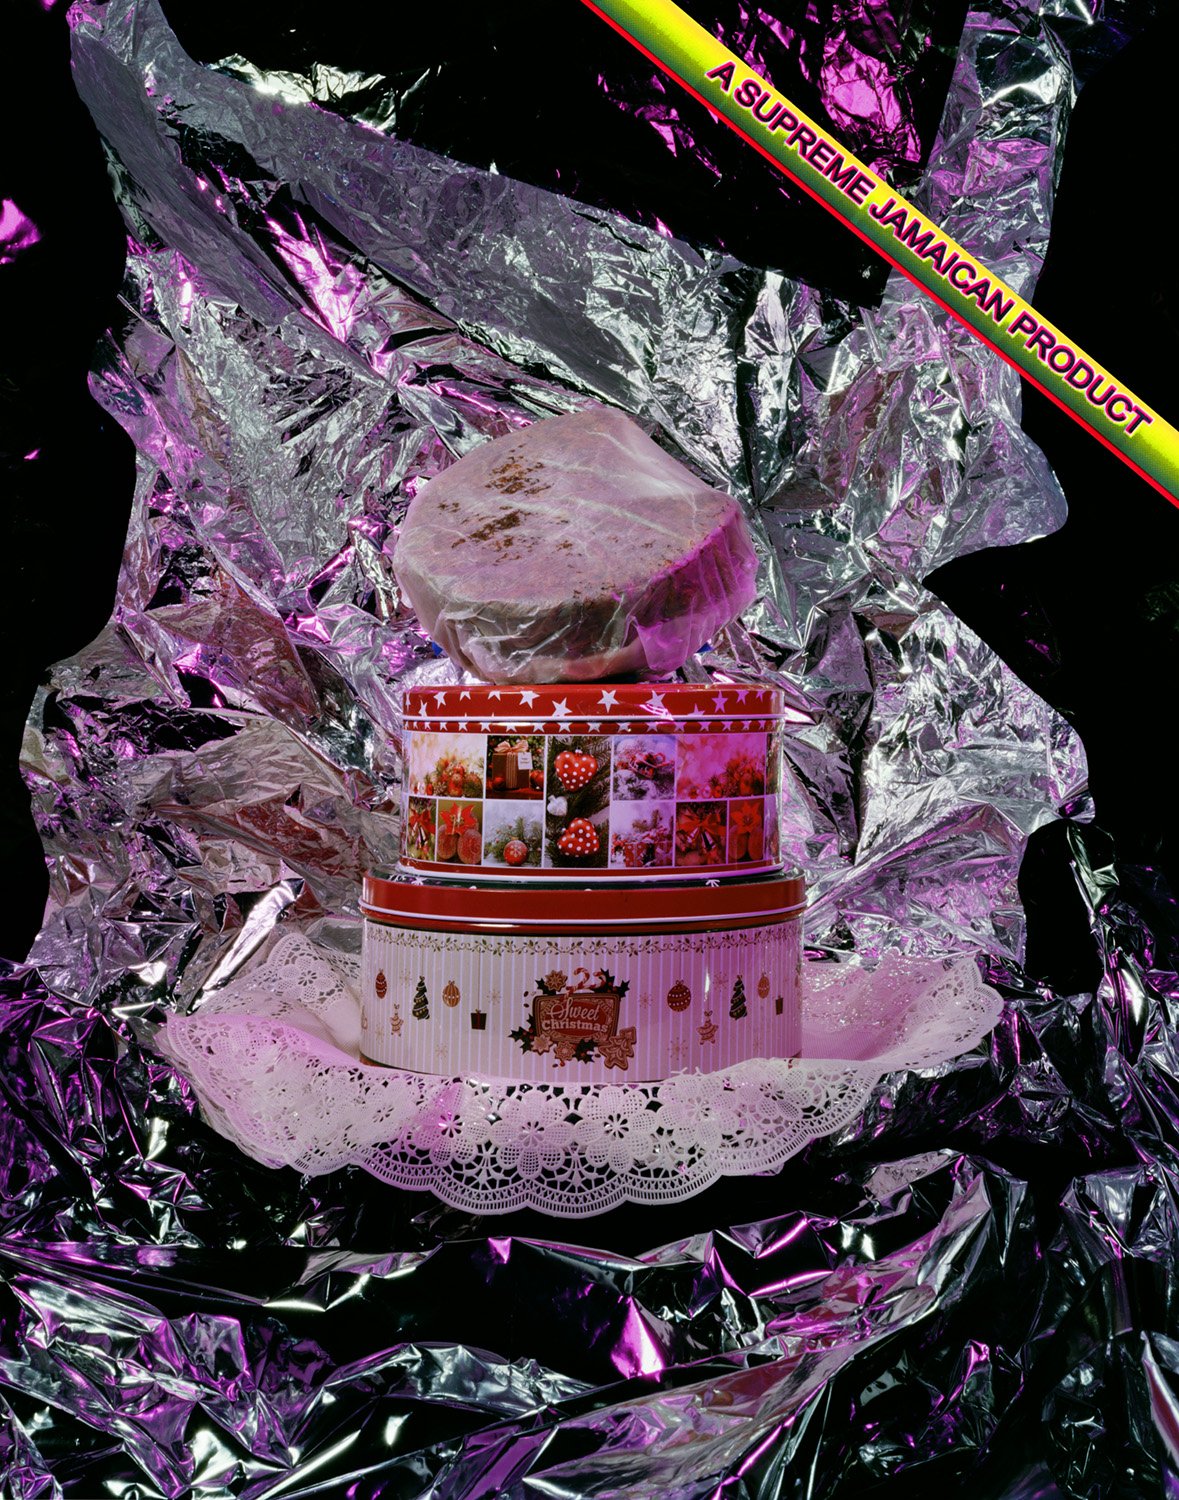   A Supreme Jamaican Product    11x14 inches, 2022, archival inkjet print, collaged with secondary archival inkjet print elements  